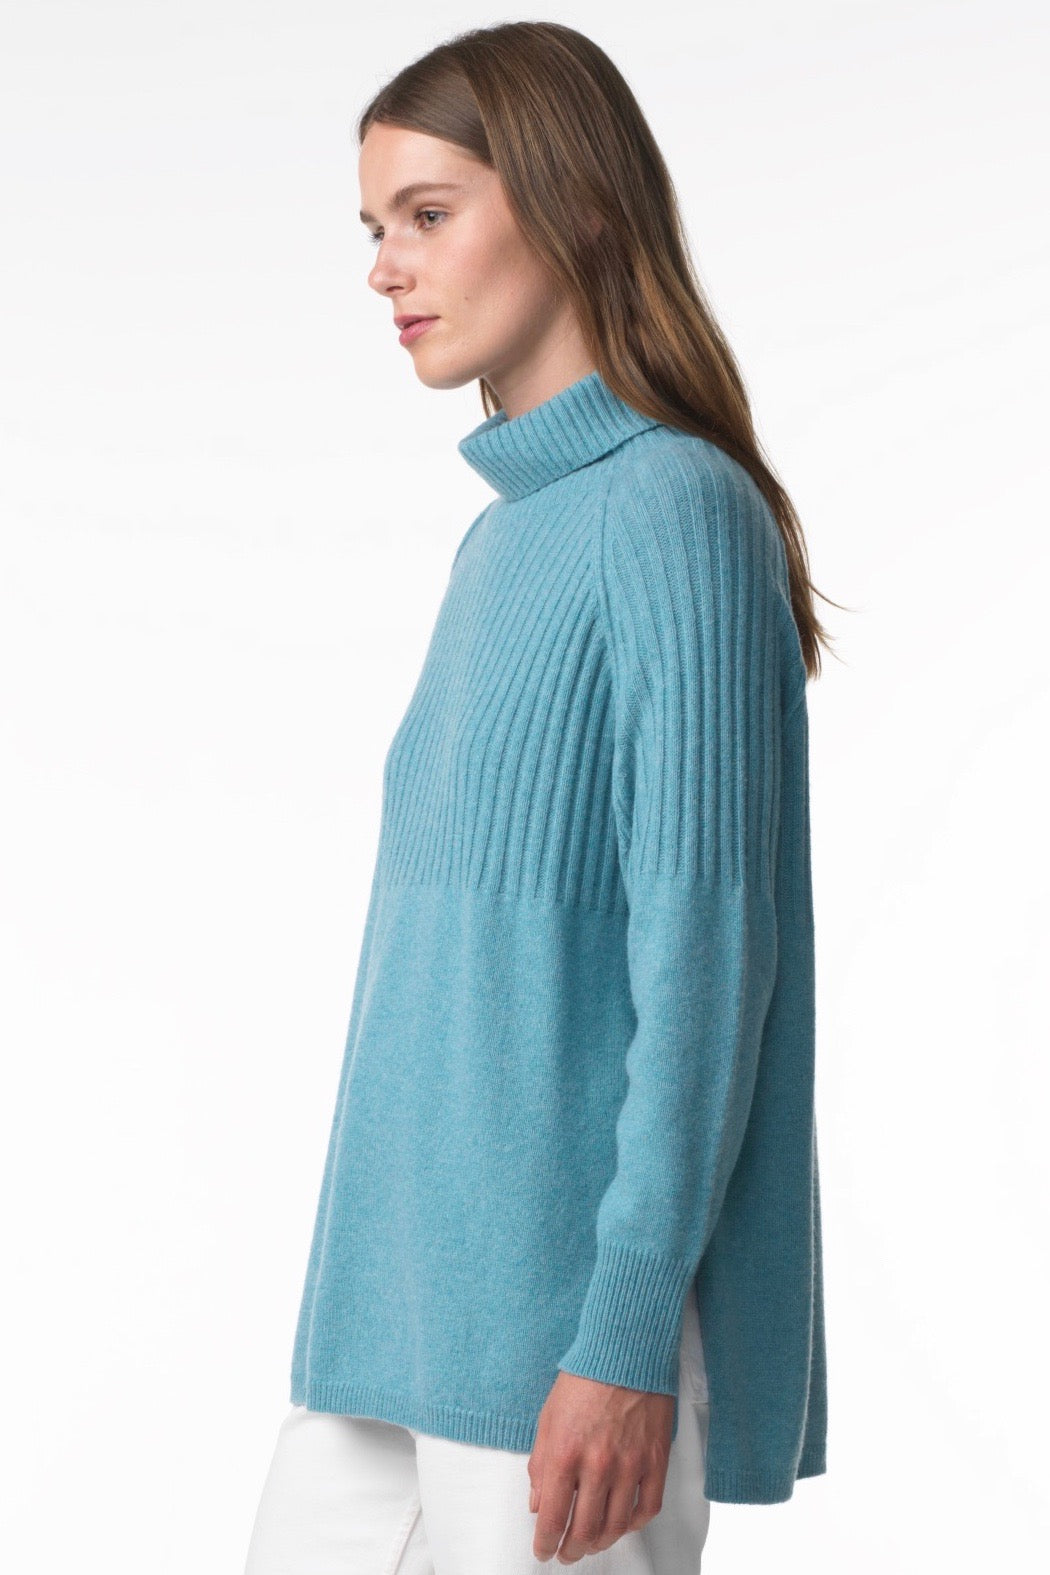 Zaket & Plover Zaket & Plover - Rib Detail Sweater - Mist available at The Good Life Boutique